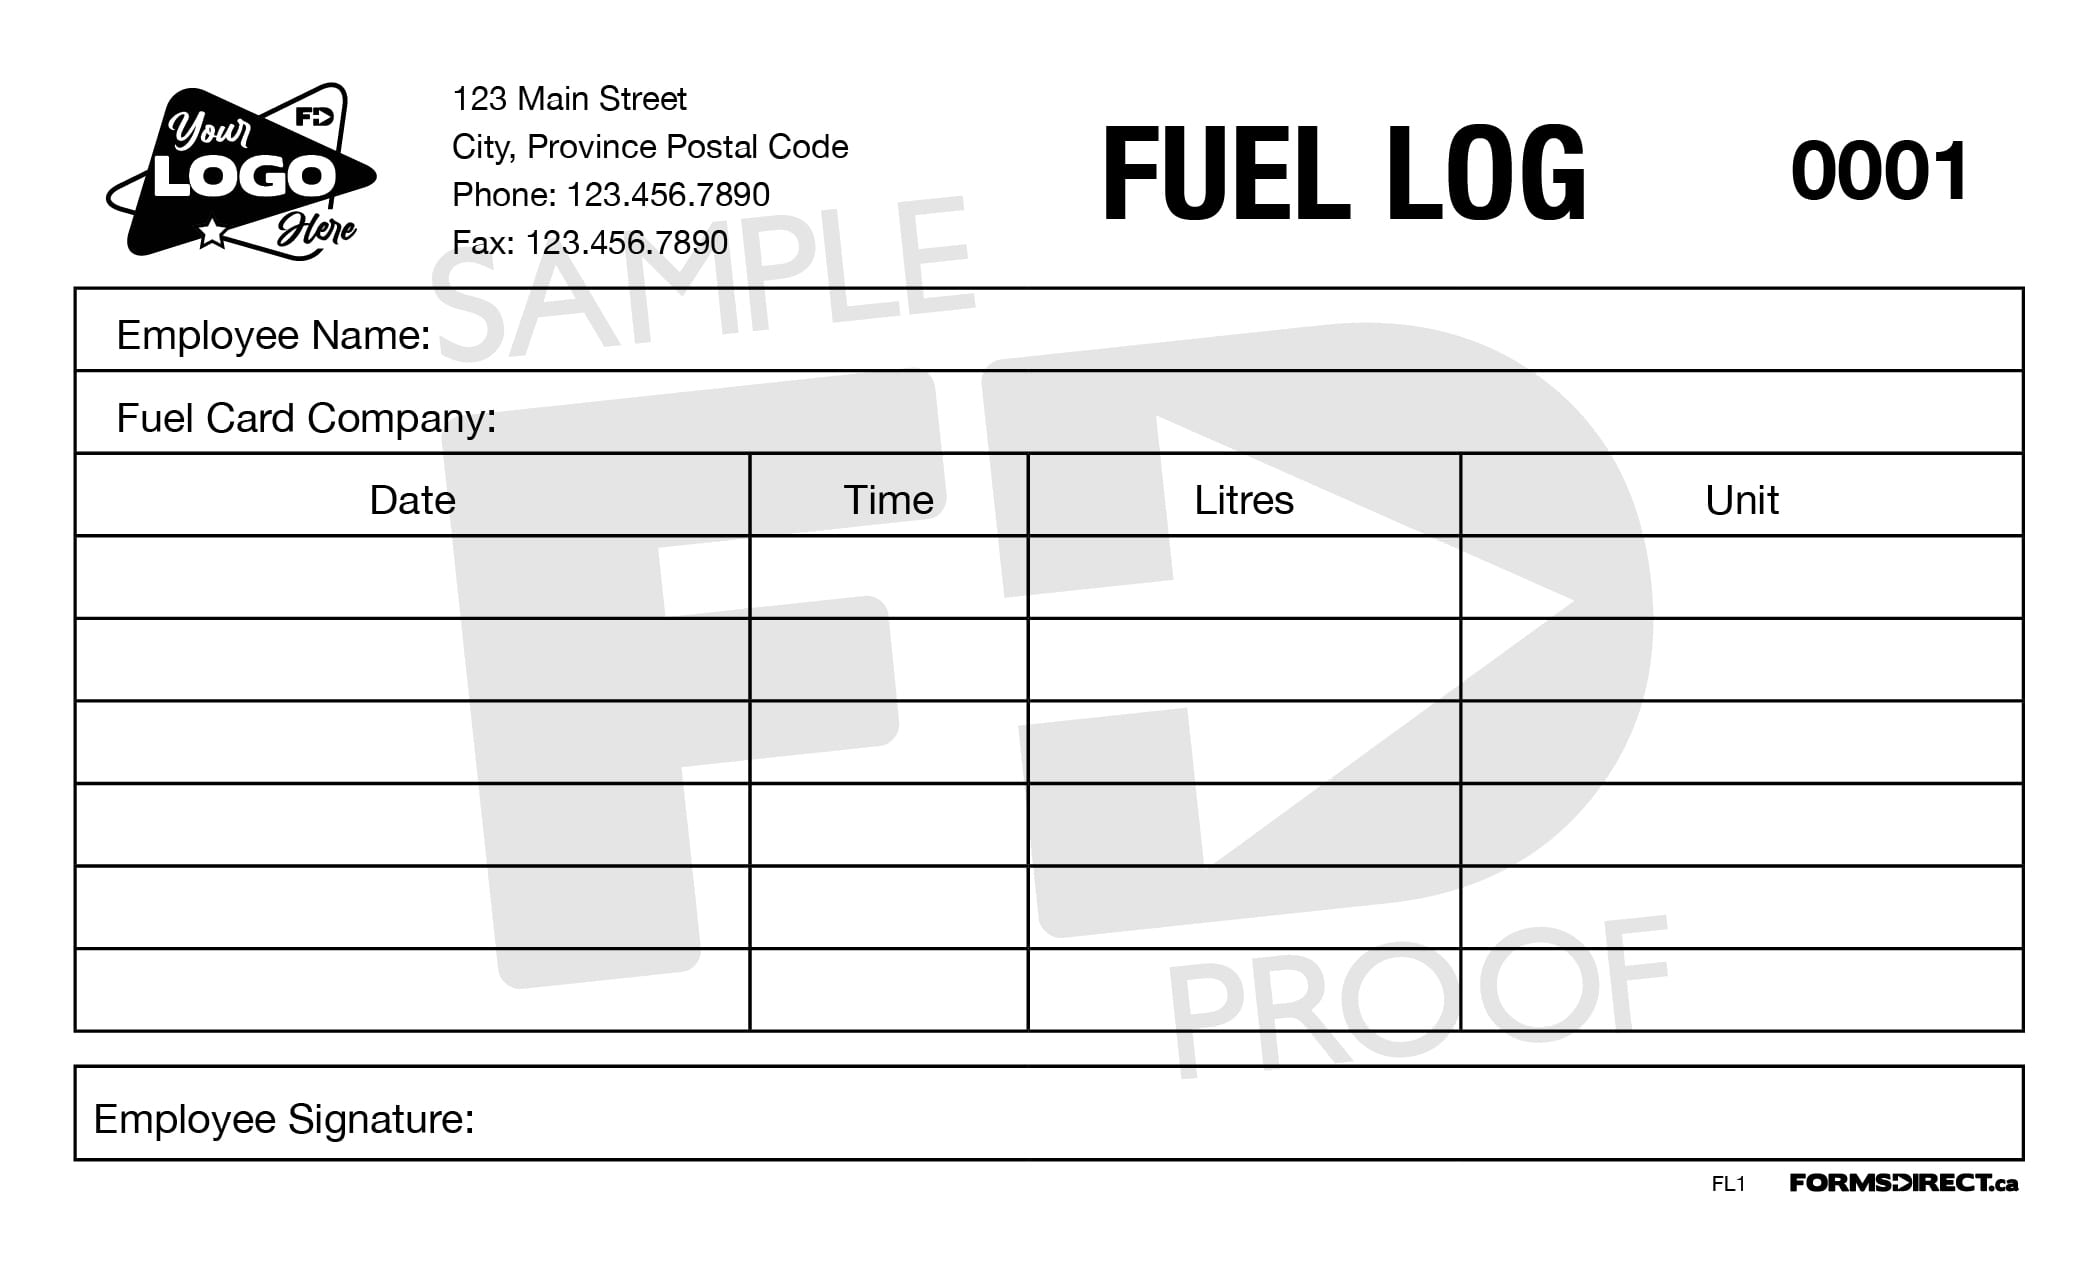 Fuel Log FL1 Customizable Form Template Forms Direct